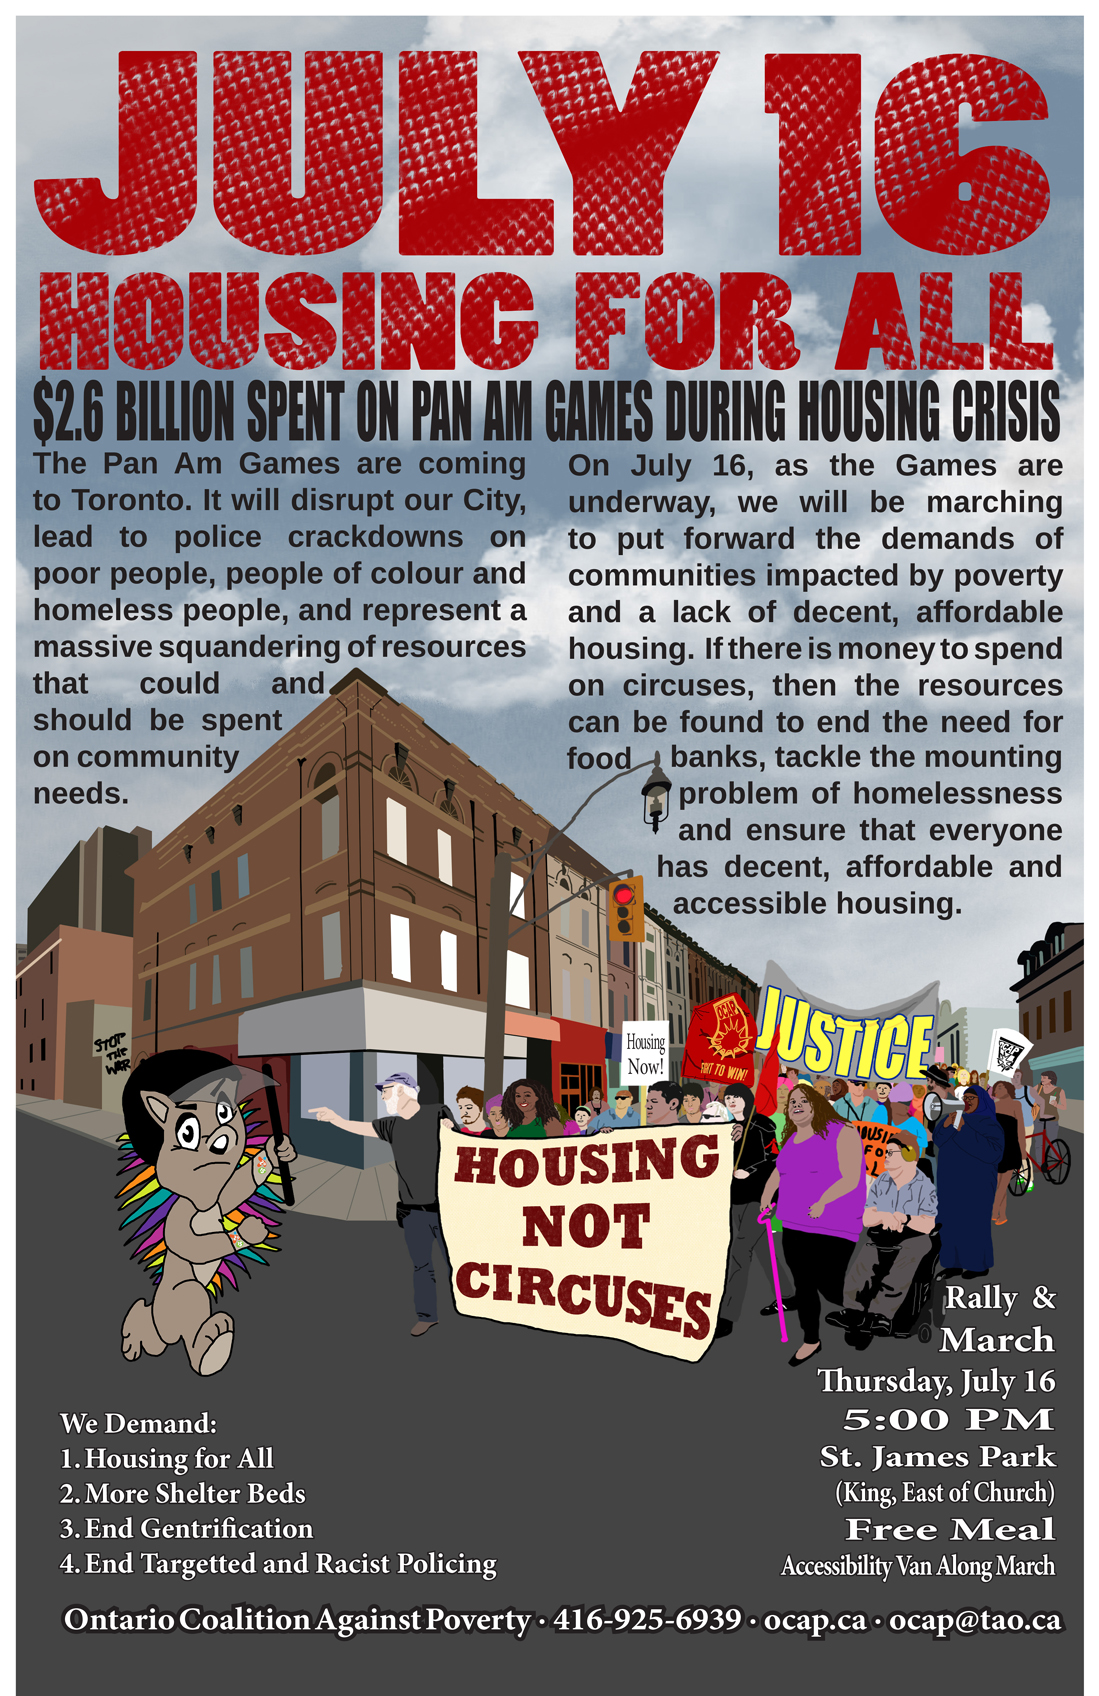 July 16: Housing For All - Anti Panam Games Poster, 2015